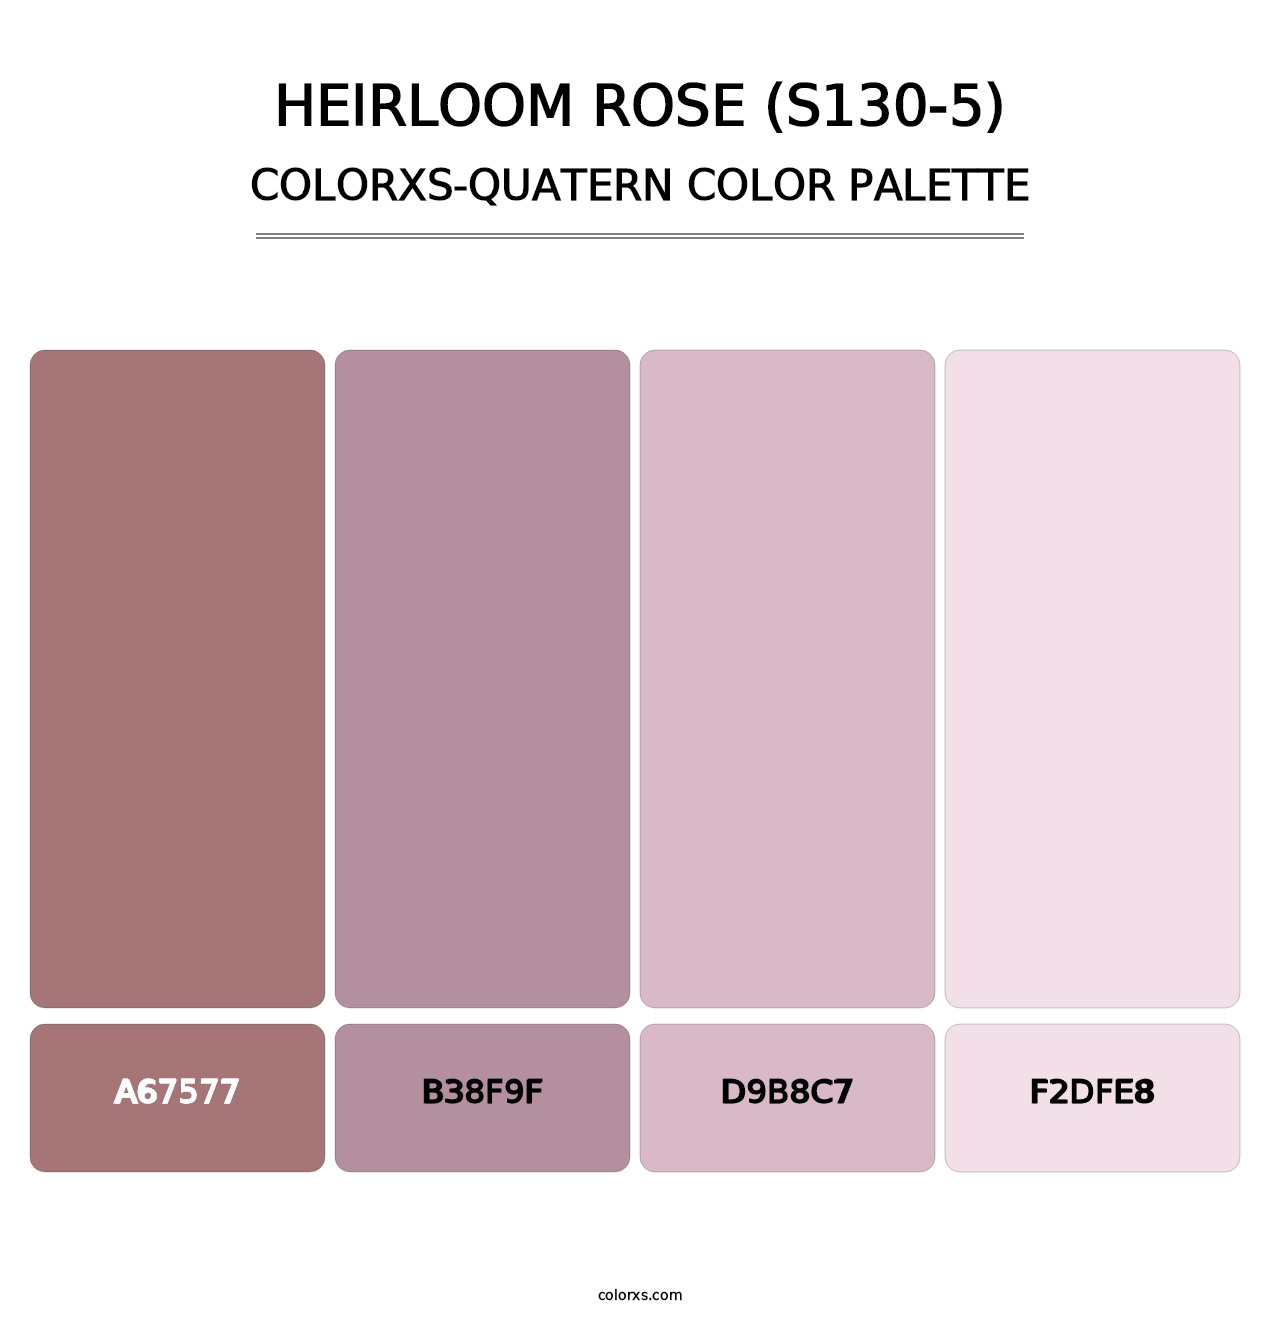 Heirloom Rose (S130-5) - Colorxs Quatern Palette